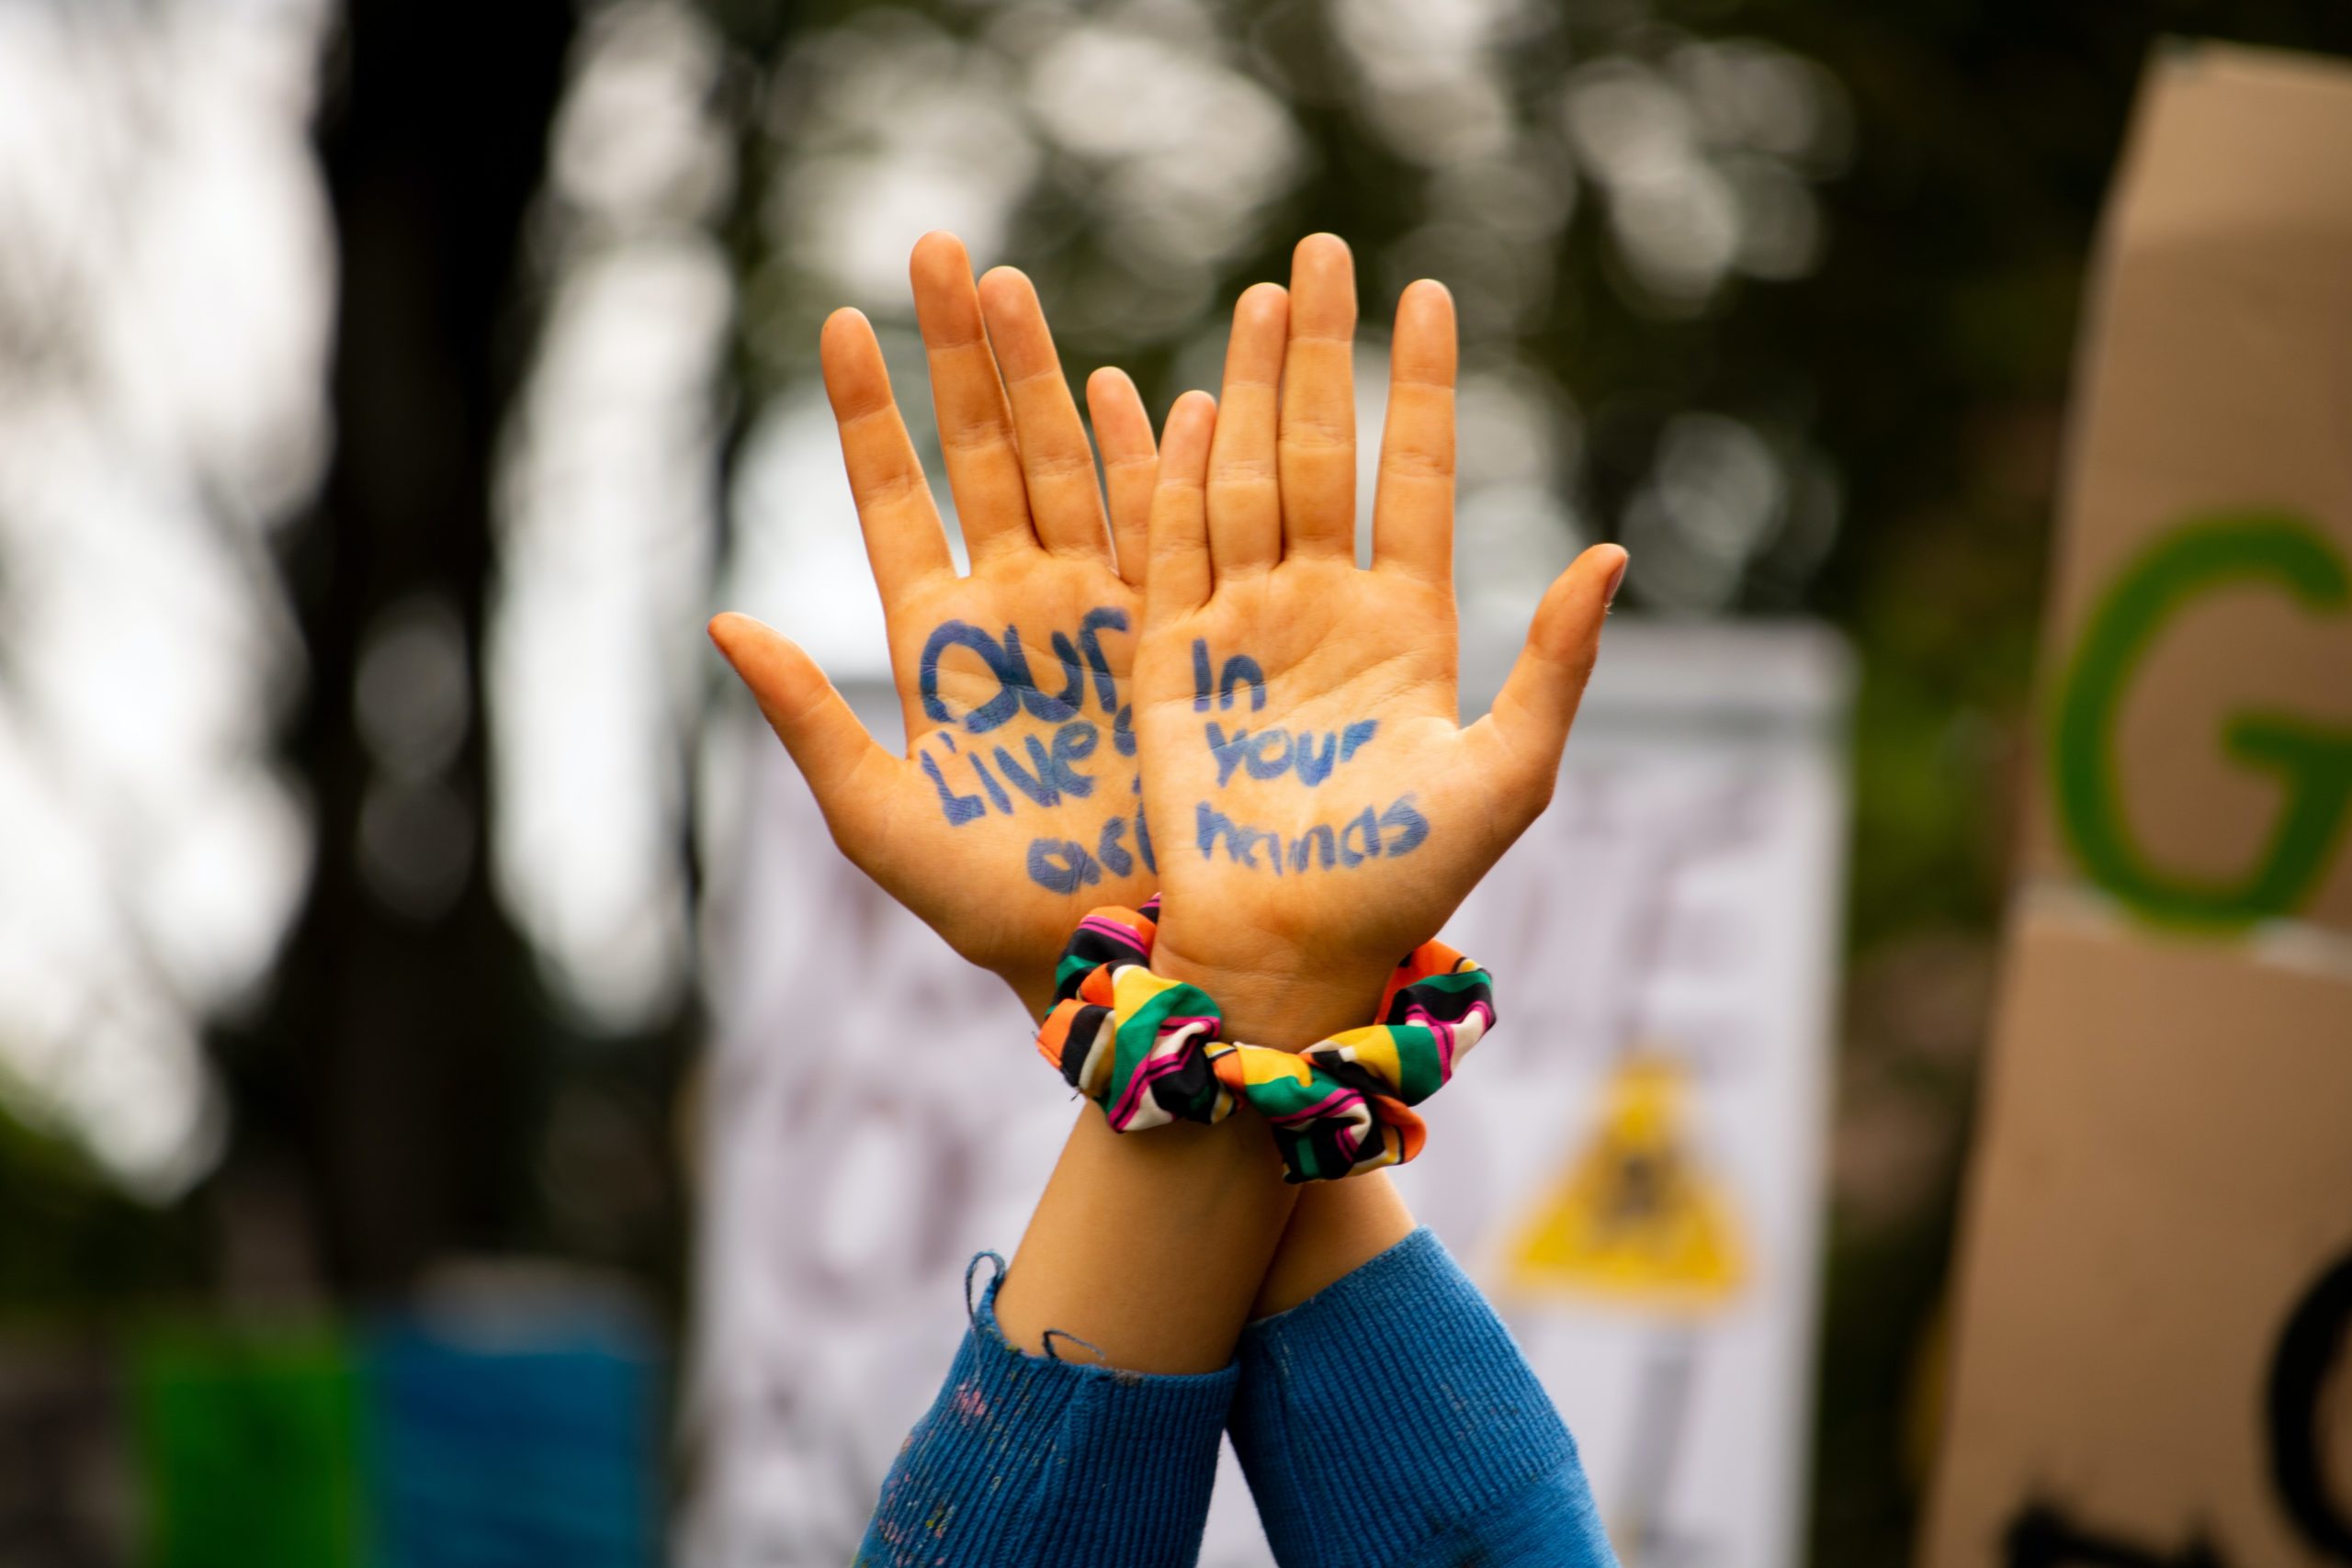 A pair of hands held up with the words 'our lives are in your hands' written on them in blue paint.